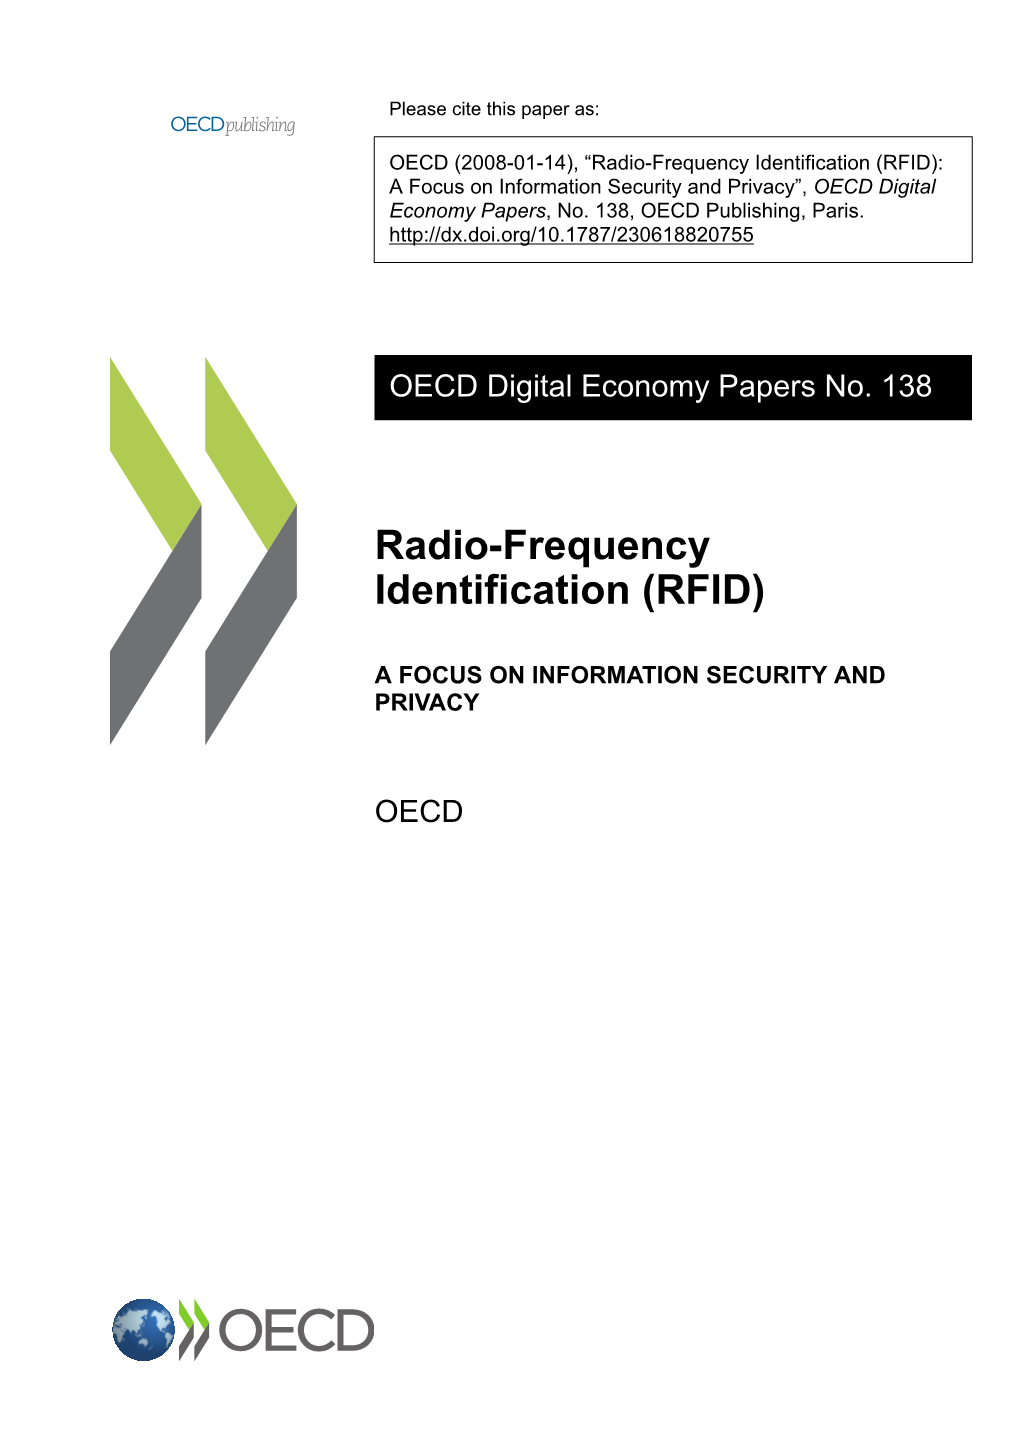 Radio-Frequency Identification (RFID): a Focus on Information Security and Privacy”, OECD Digital Economy Papers, No